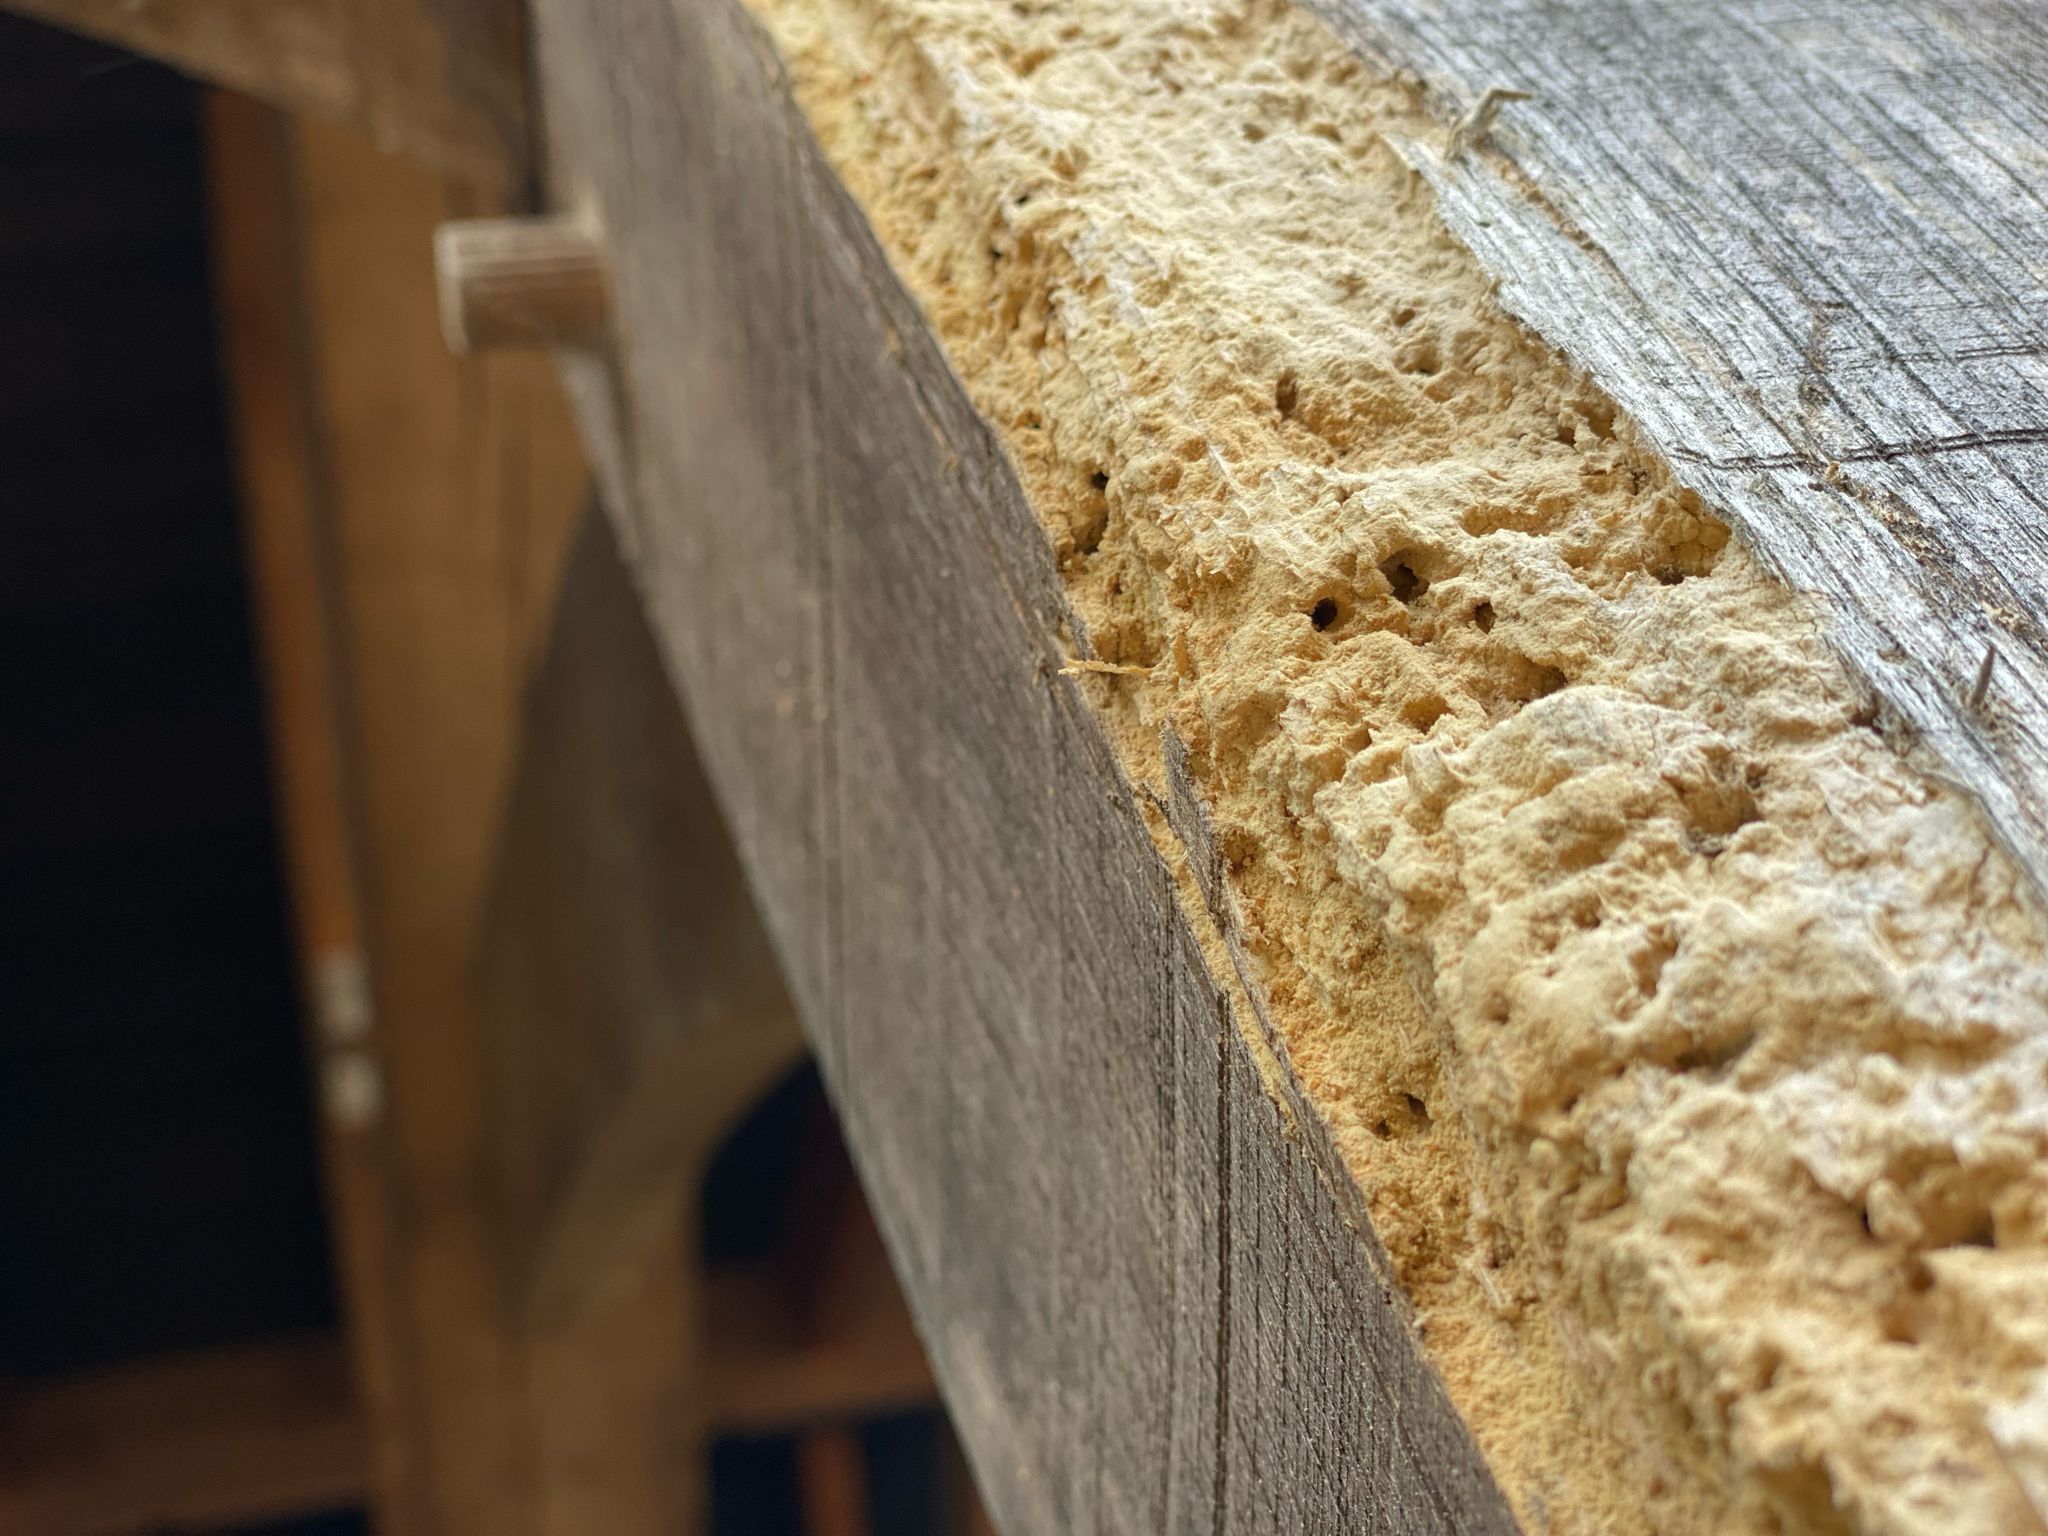 Woodworm dust, called frass, on timber